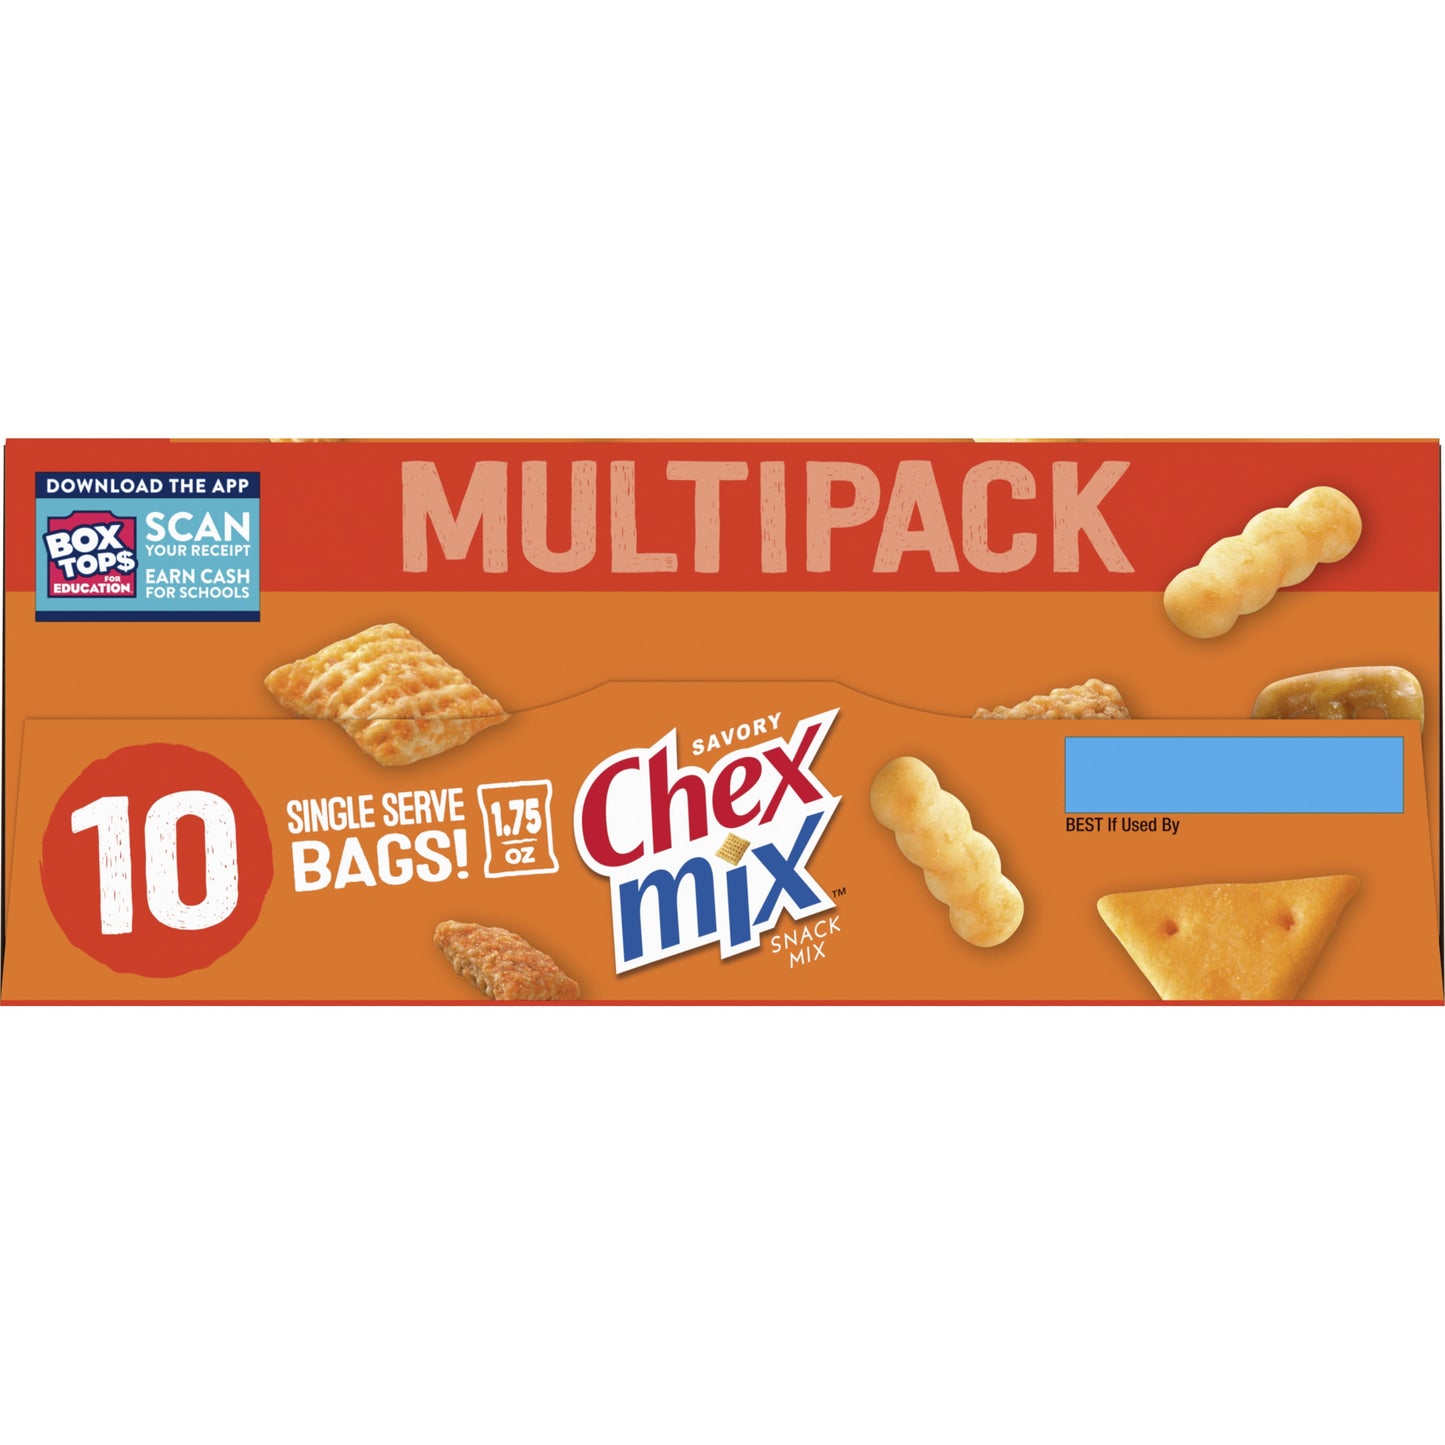 Snack Mix, Cheddar, Savory Snack Bags, Multipack, 1.75 Oz, 10 Ct